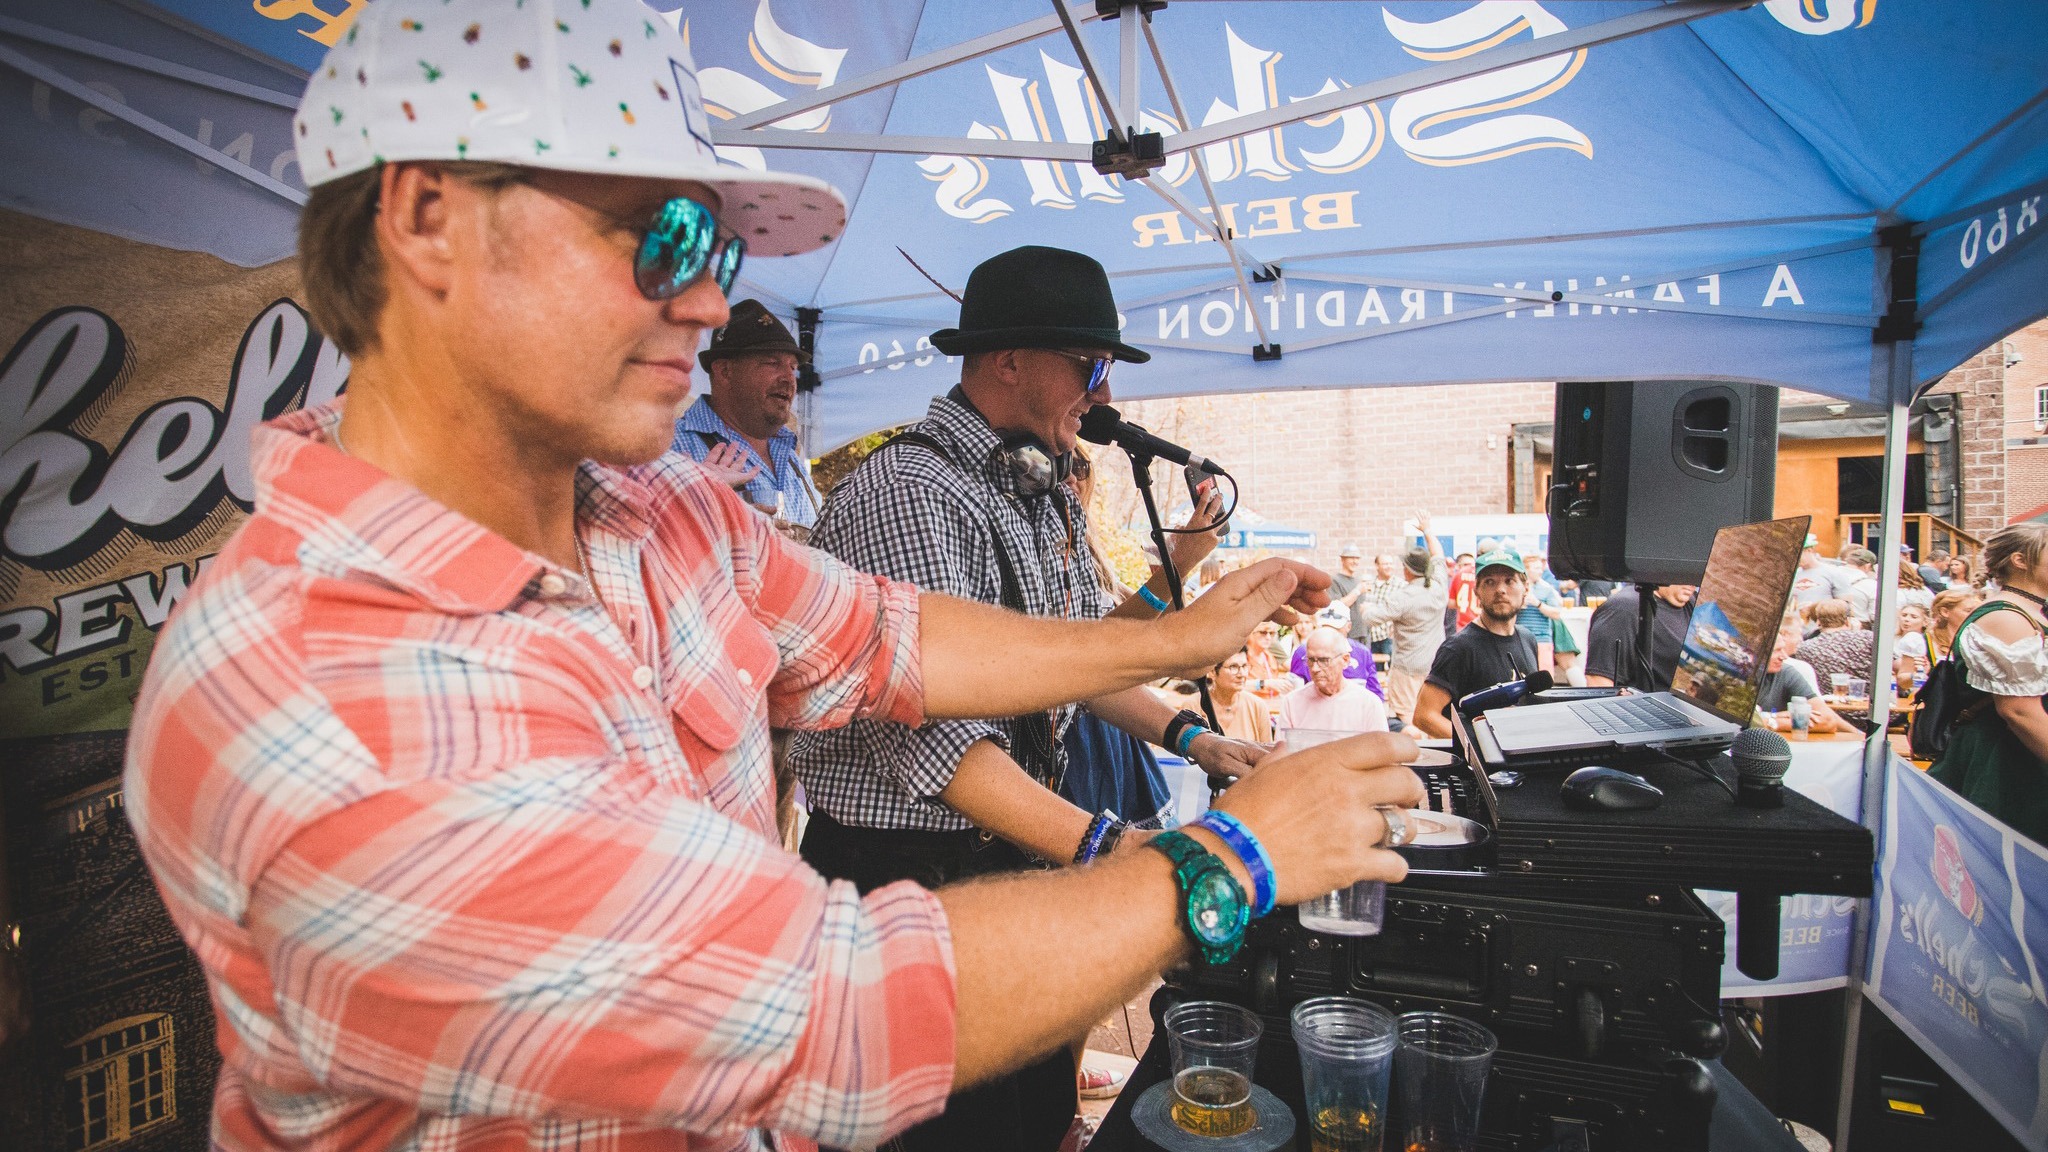 Two guys behind a DJ setup playing music for a crowd at Schell's Oktoberfest.